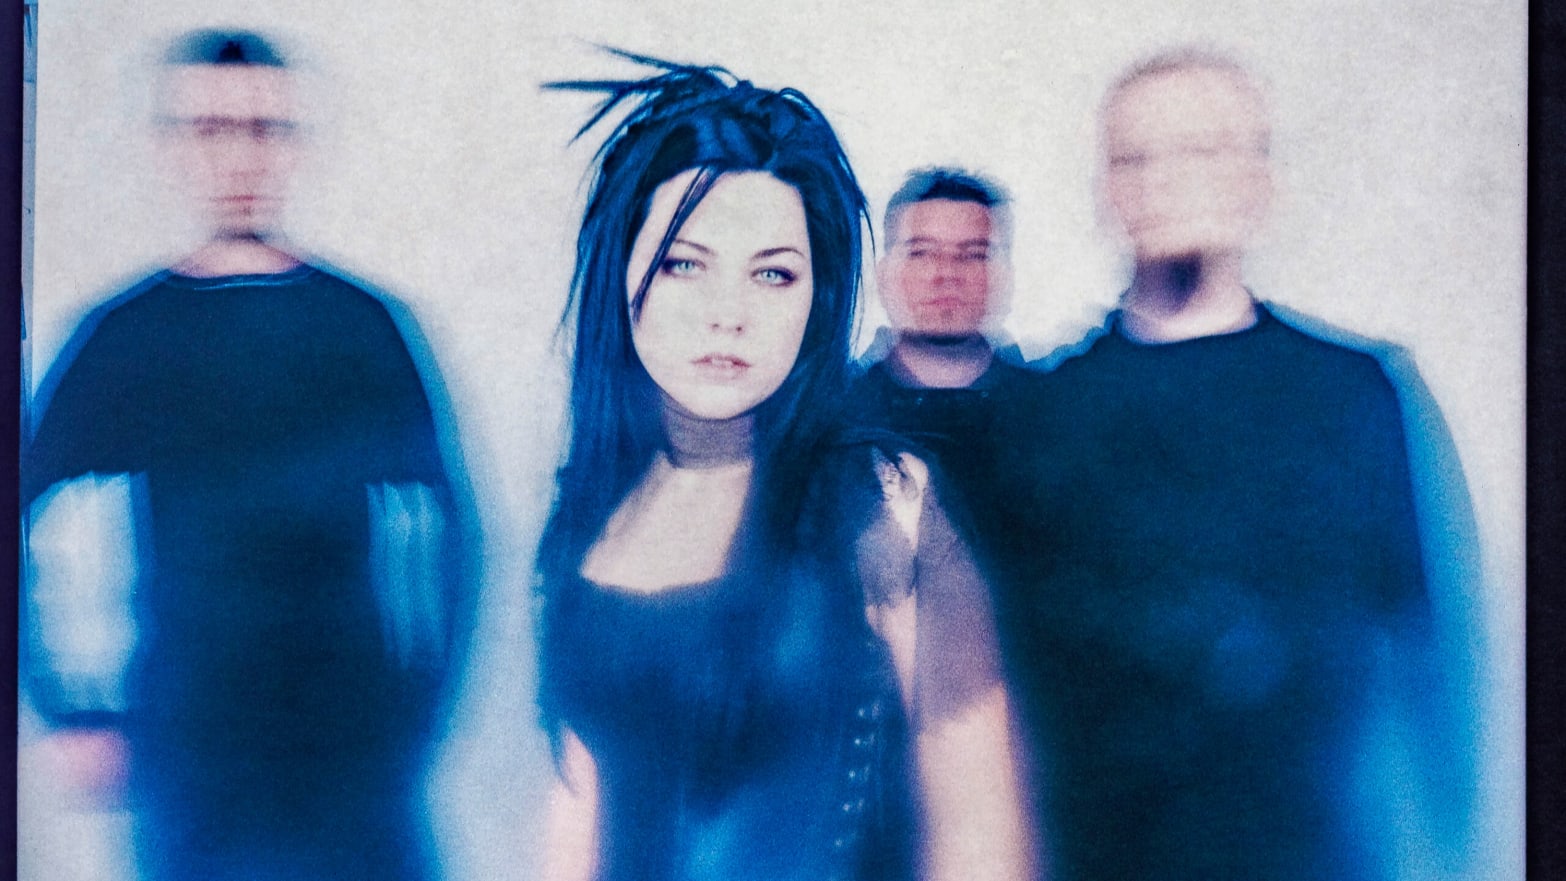 A photo including the band Evanescence for their "Fallen" 20th anniversary